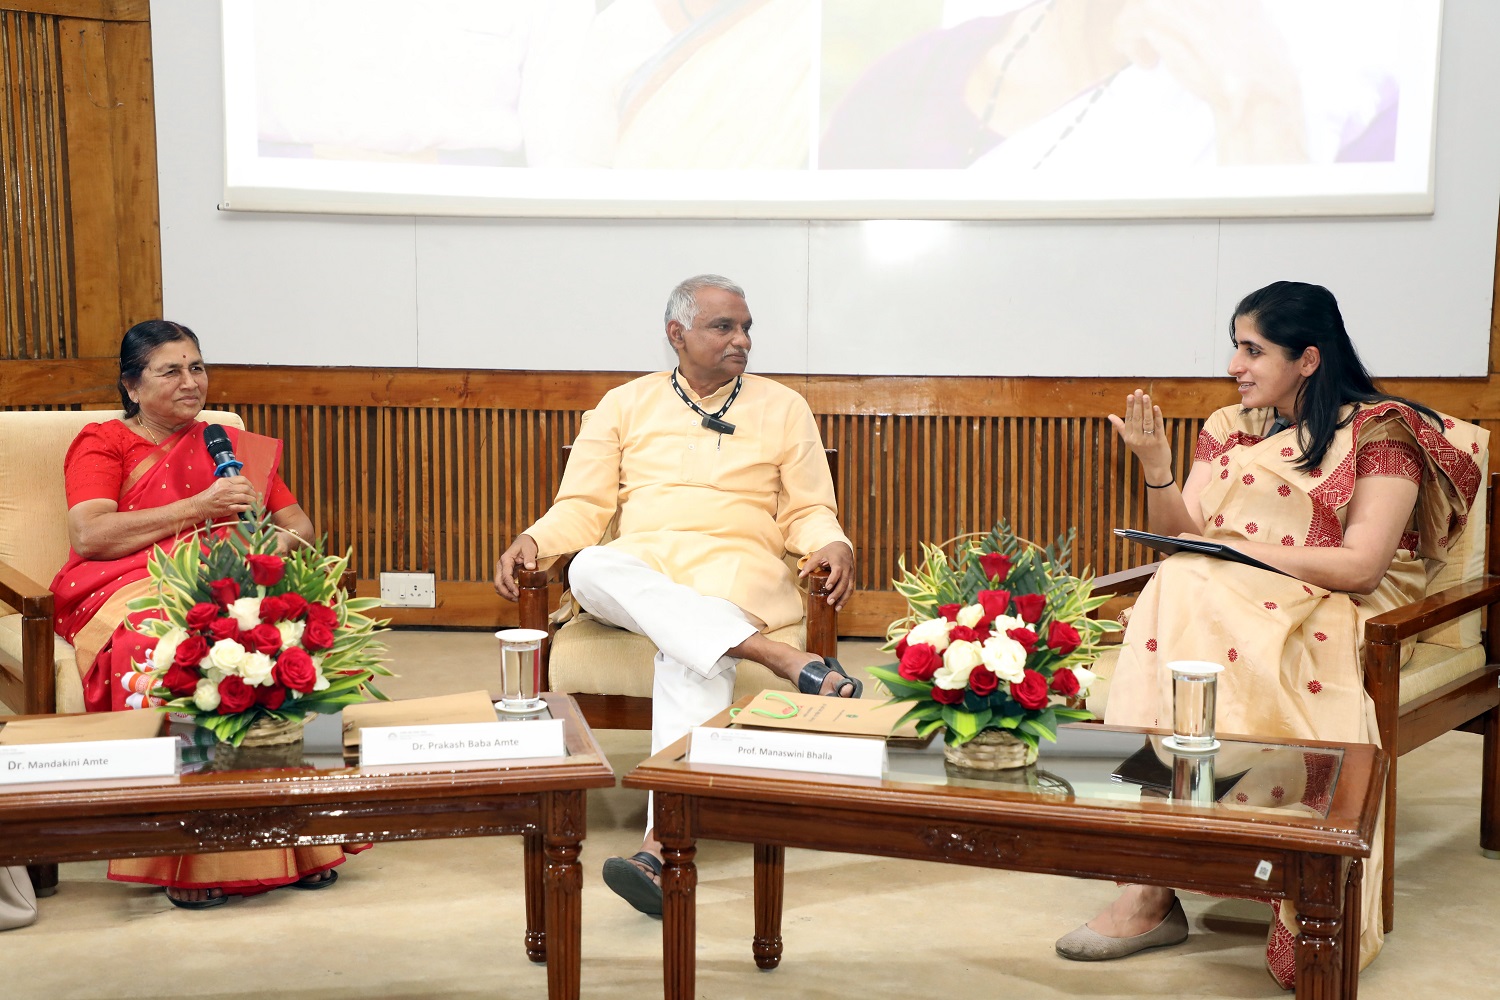 Magsaysay awardees Dr. Prakash Baba Amte, and Dr. Mandakini Amte, in conversation with Prof. Manaswini Bhalla, faculty from the Economics and Social Sciences area at IIMB, at ‘Sanvad’, the finale of the EPGP Seminar Series, hosted by the students of IIMB’s one-year MBA program, on February 05, 2020.